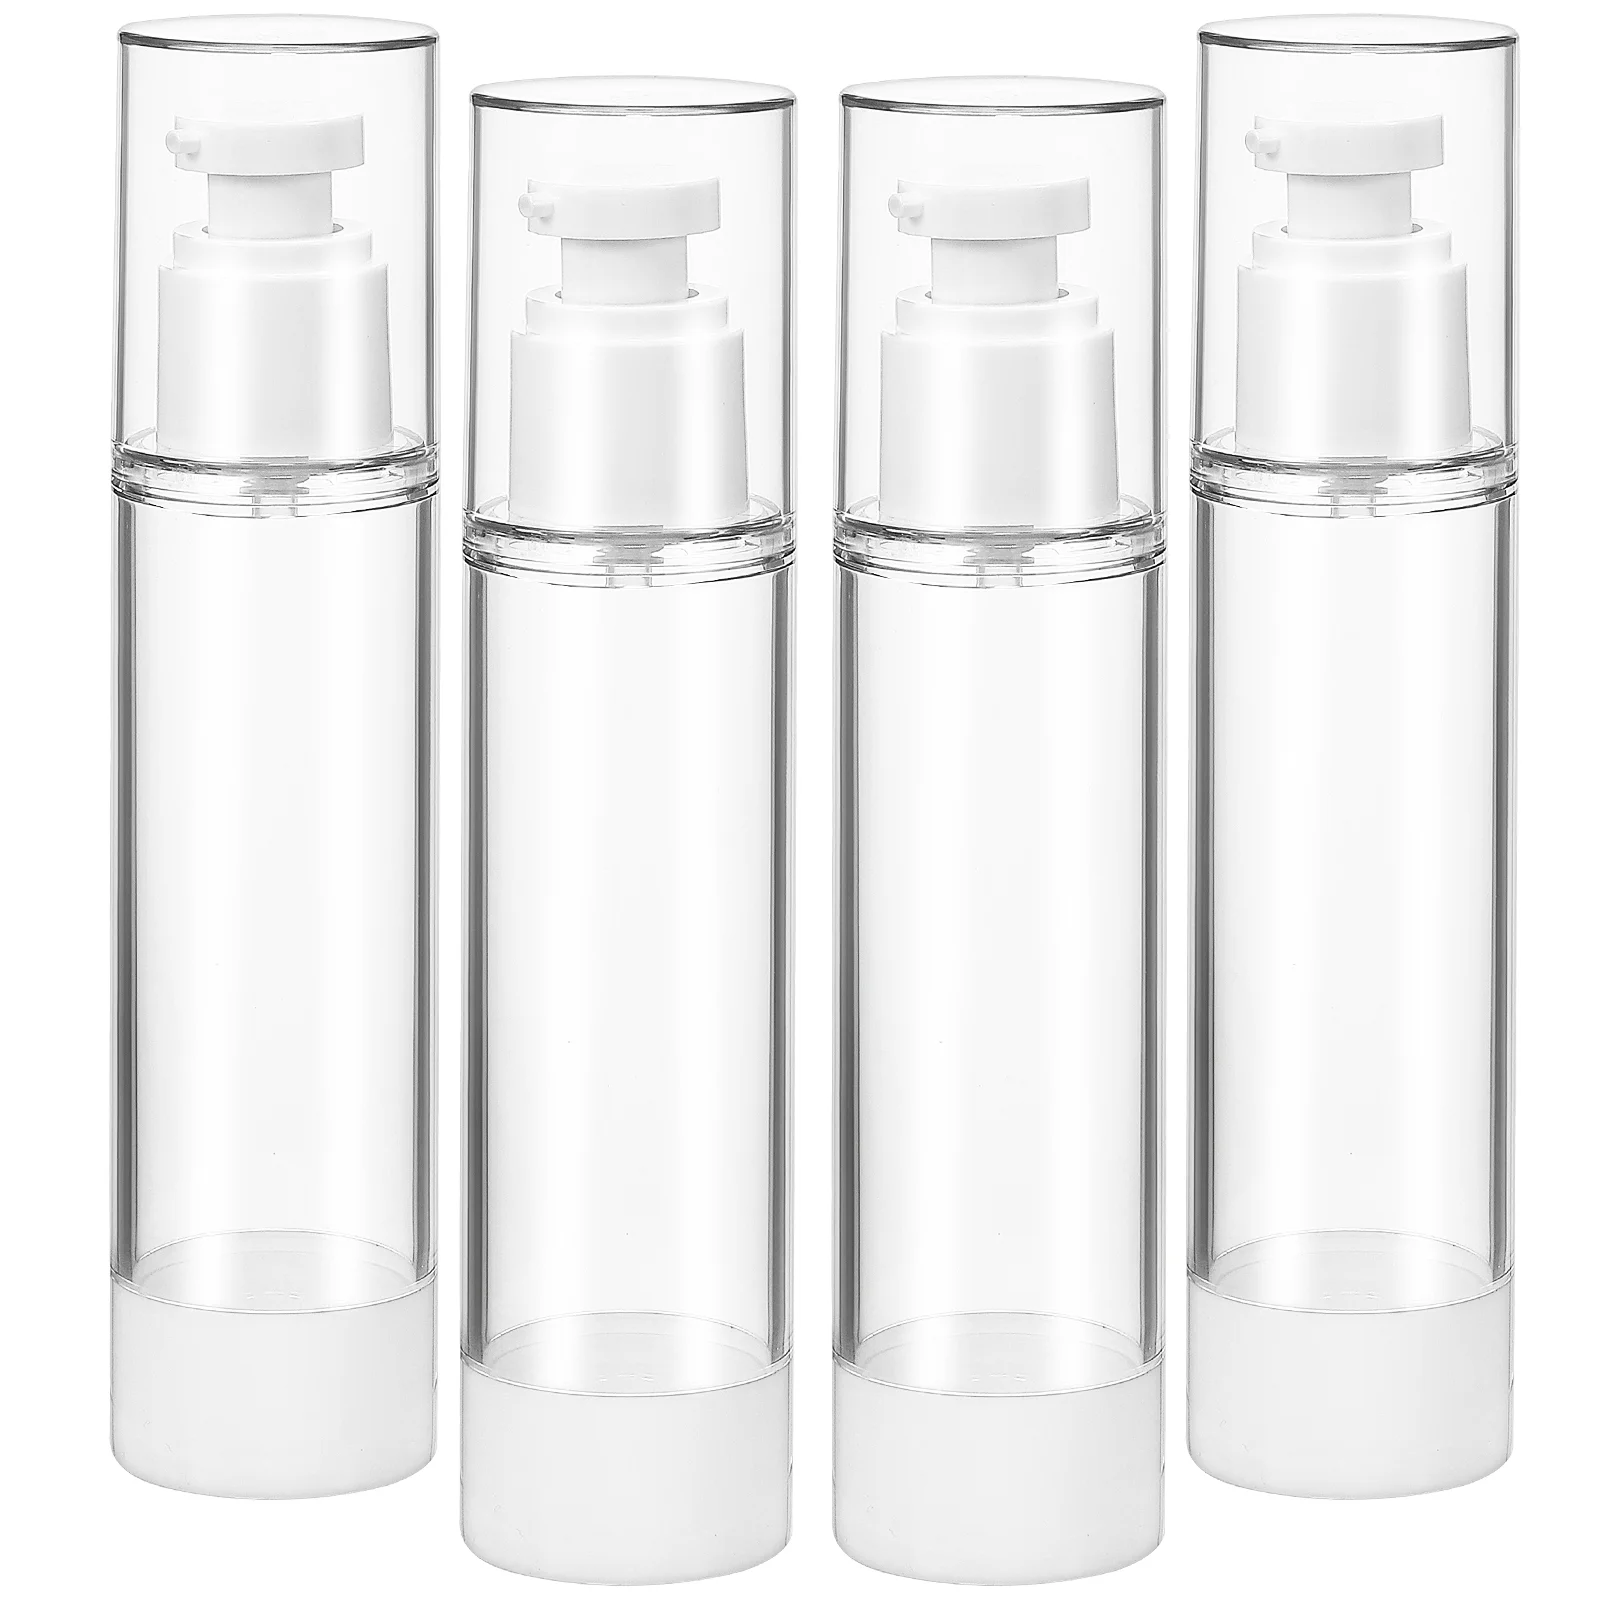 

4 Pcs Cream Vacuum Lotion Bottle With Pump Empty Travel Bottles Shampoo Bottled Airless Containers For Toiletries